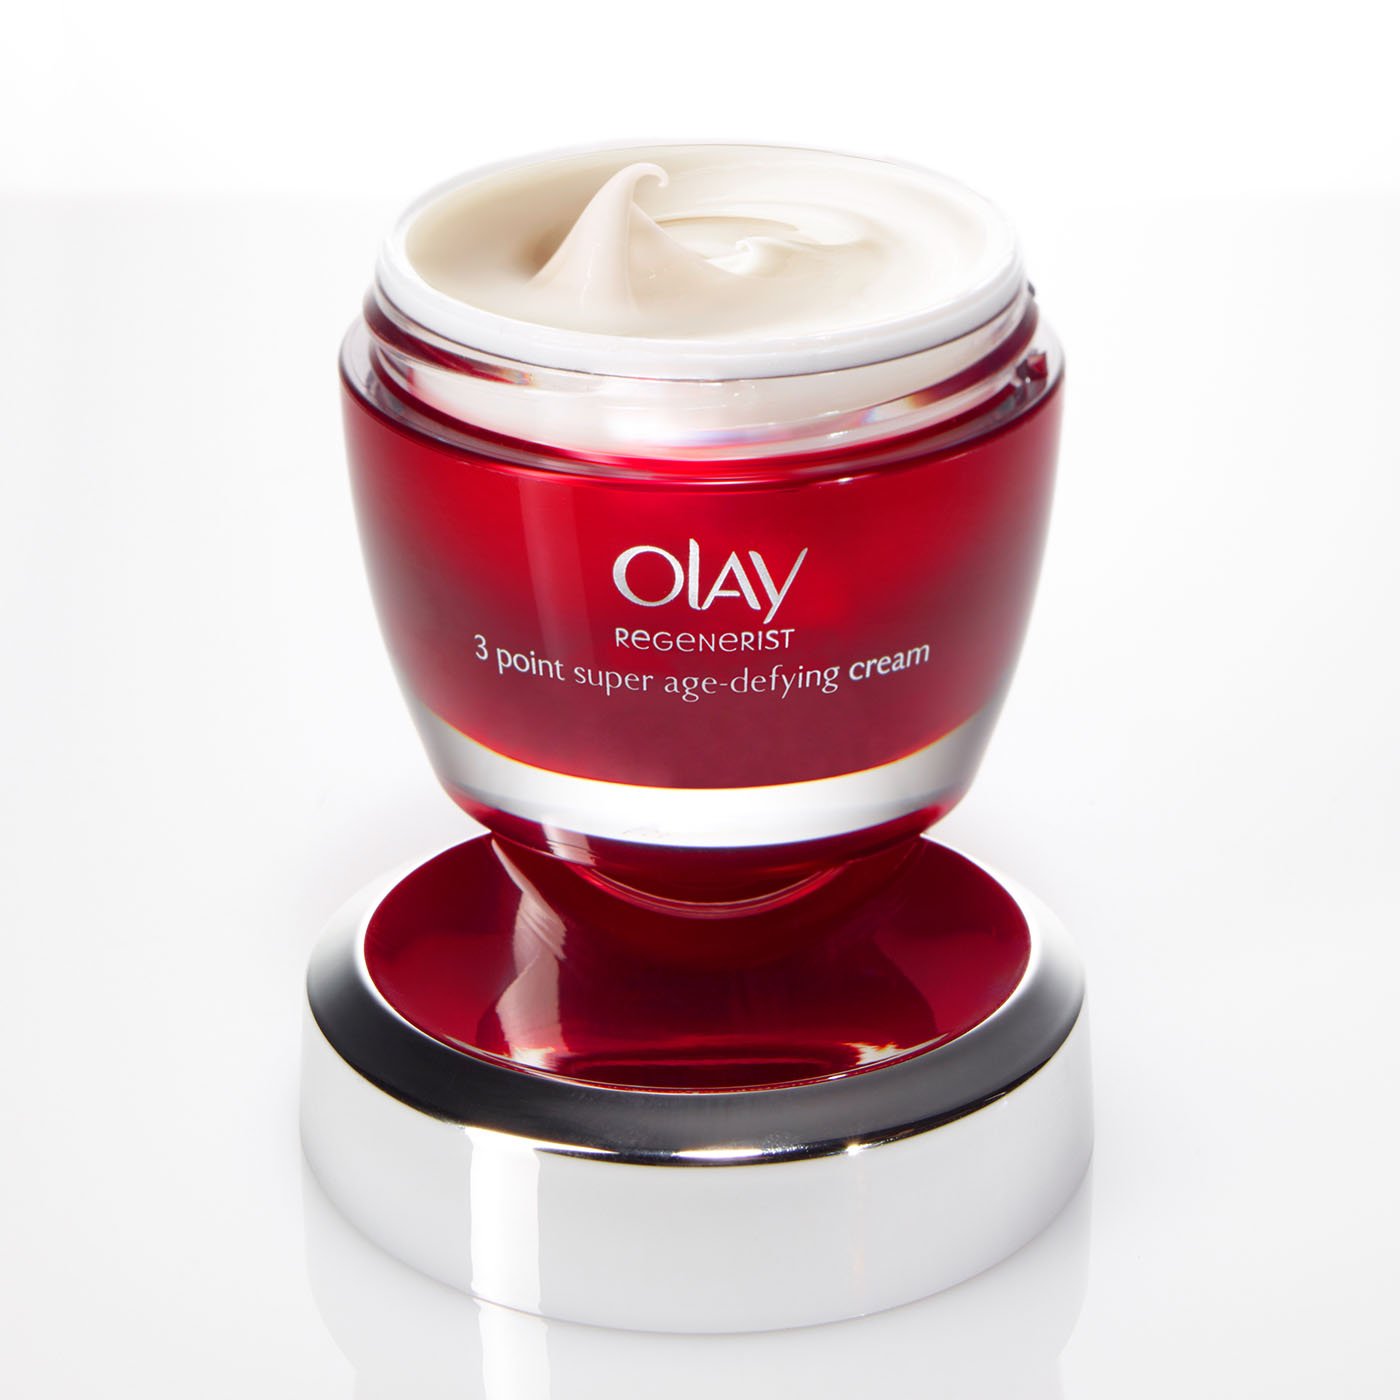  Olay product photographed for Saatchi and Saatchi to be used on Instagram by David Rowland 